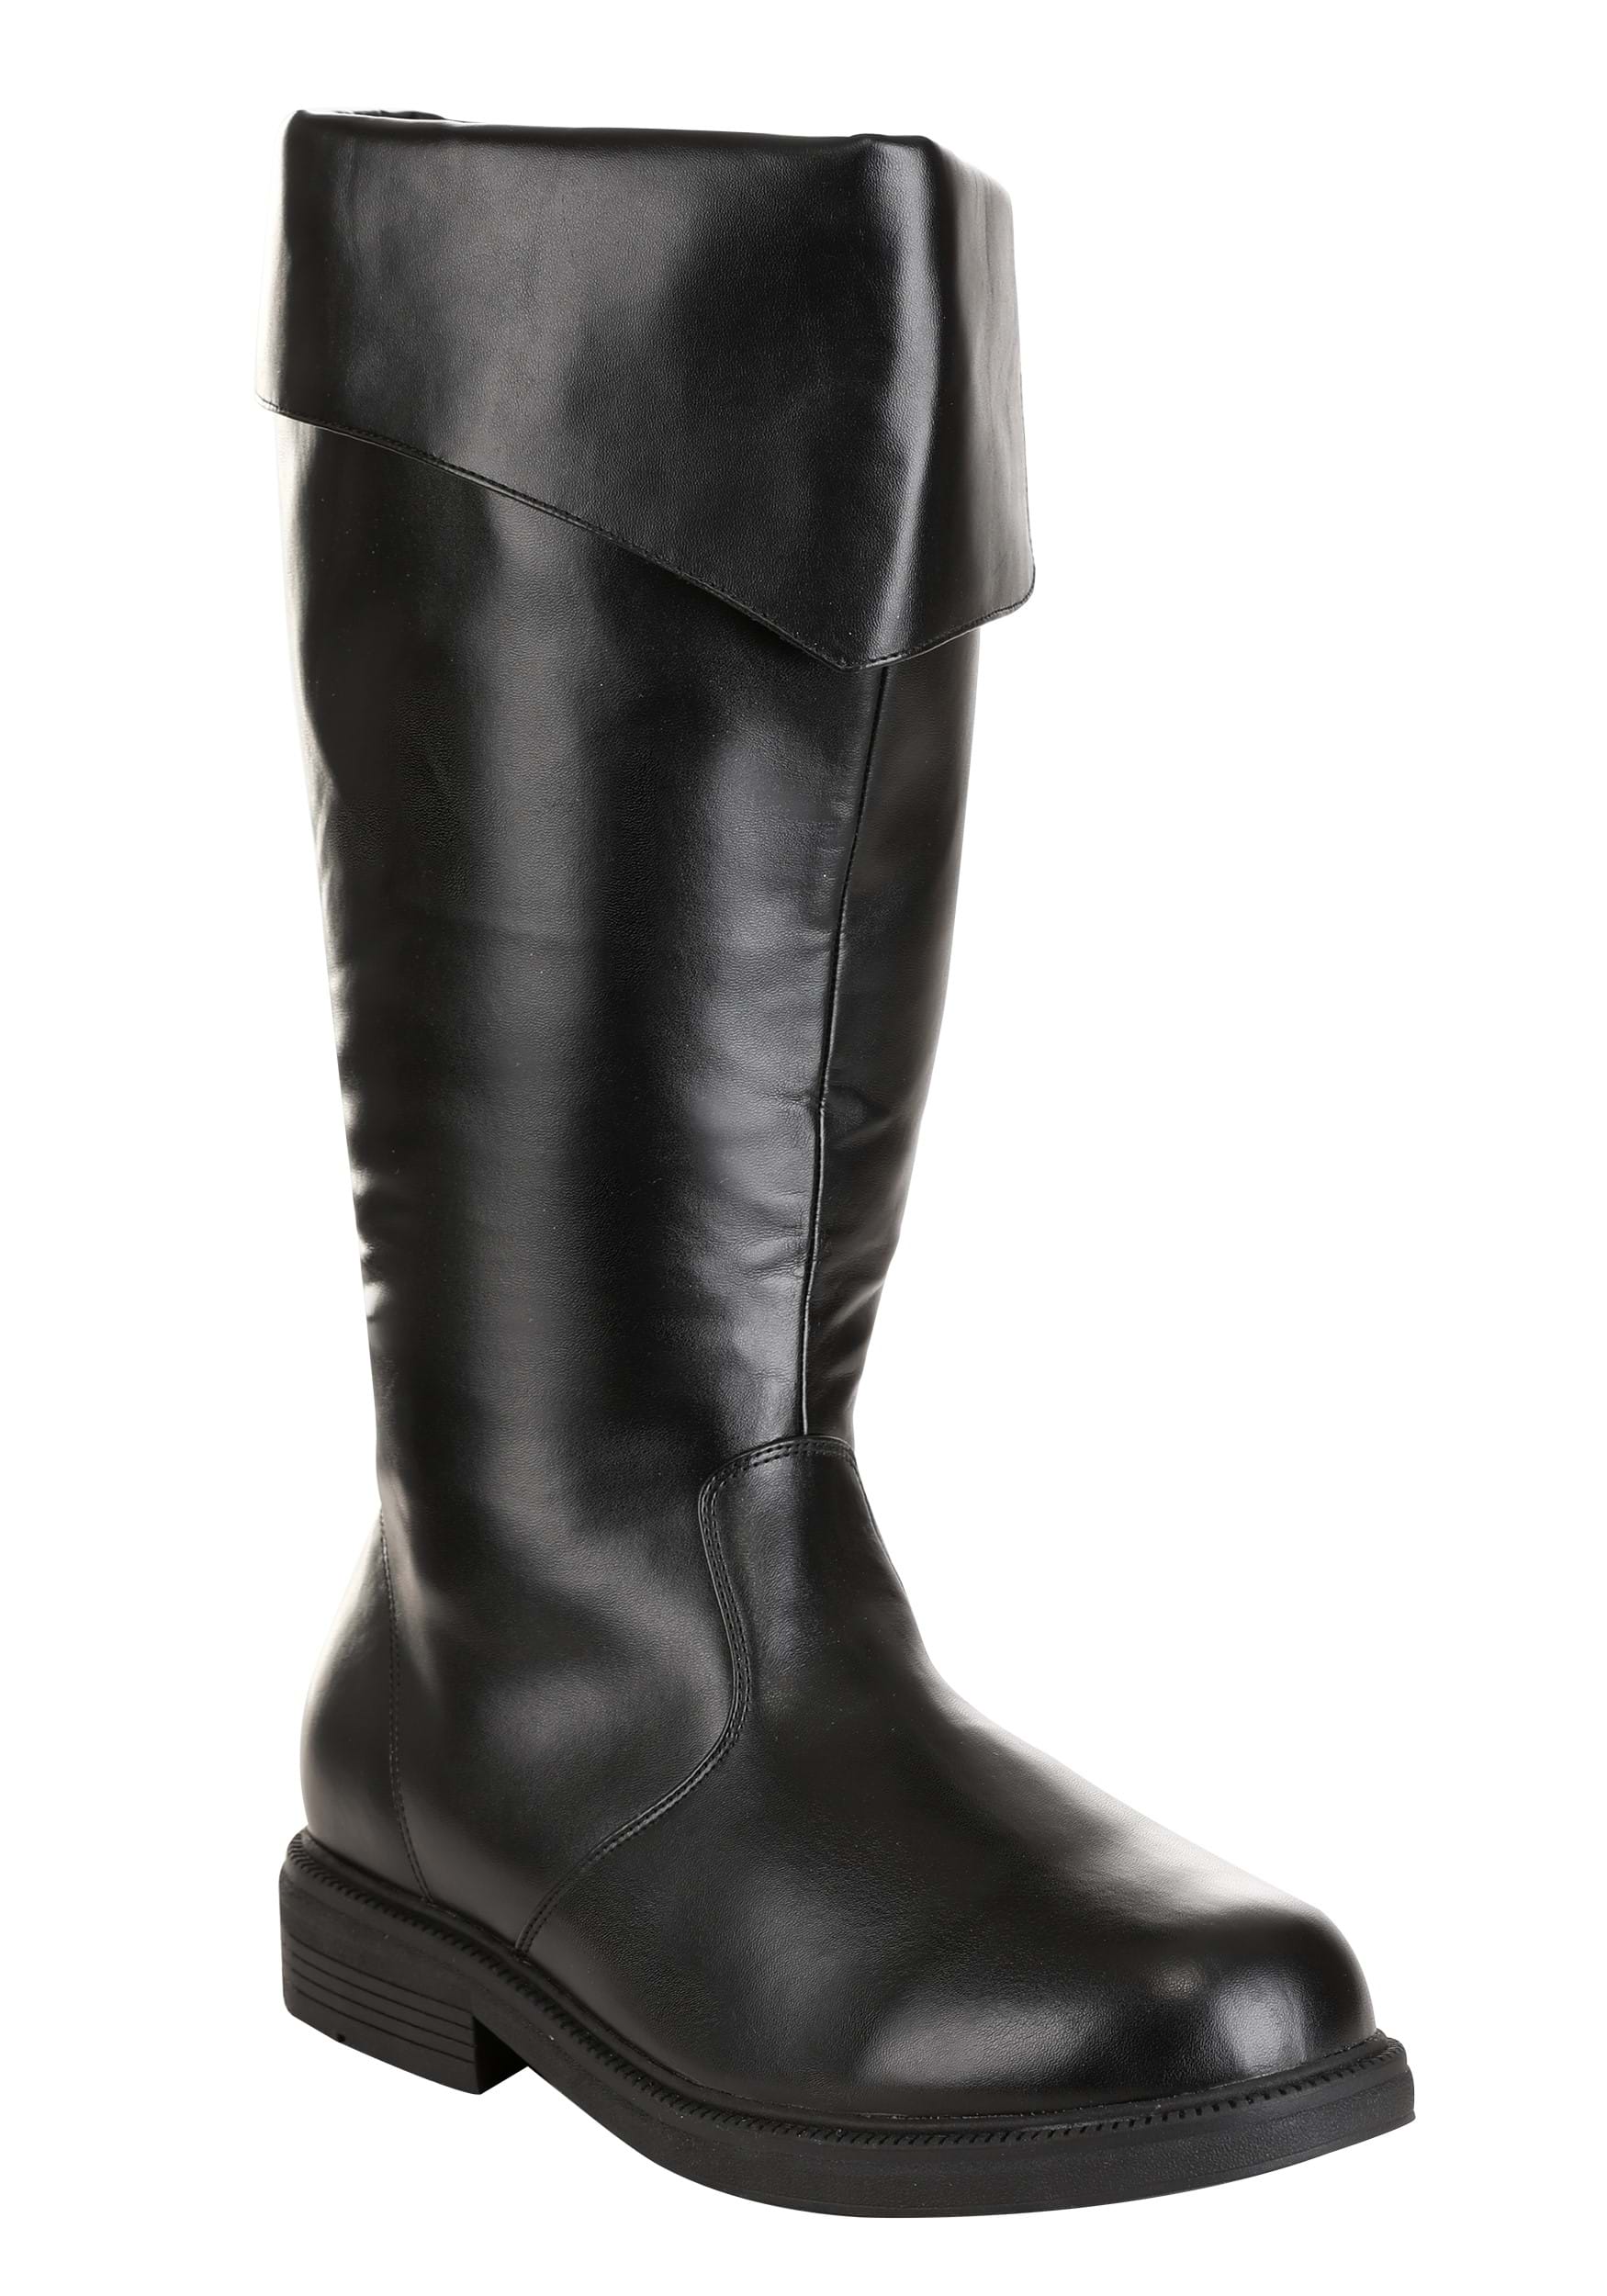 Image of Tall Black Costume Boots for Men ID FUN3408AD-6